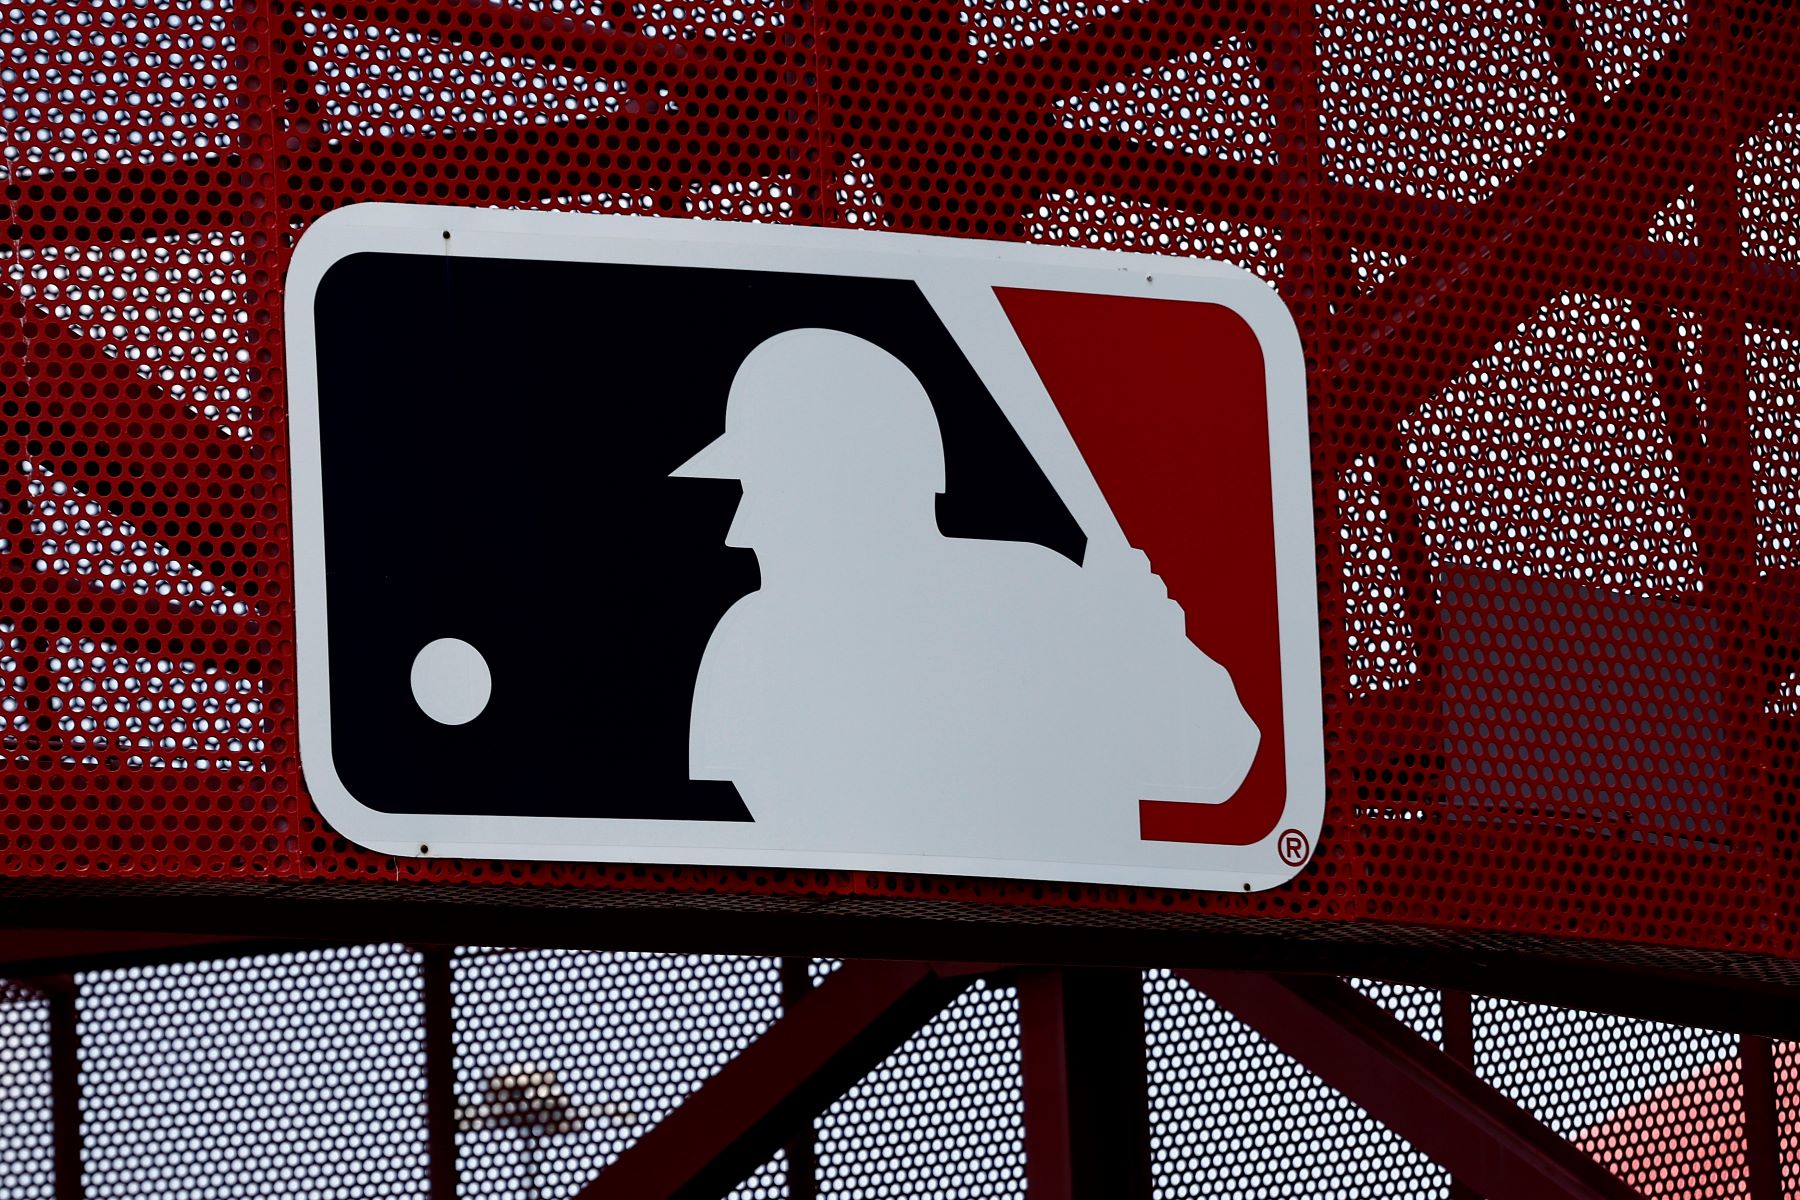 Which States Have More Than 1 MLB Baseball Team?